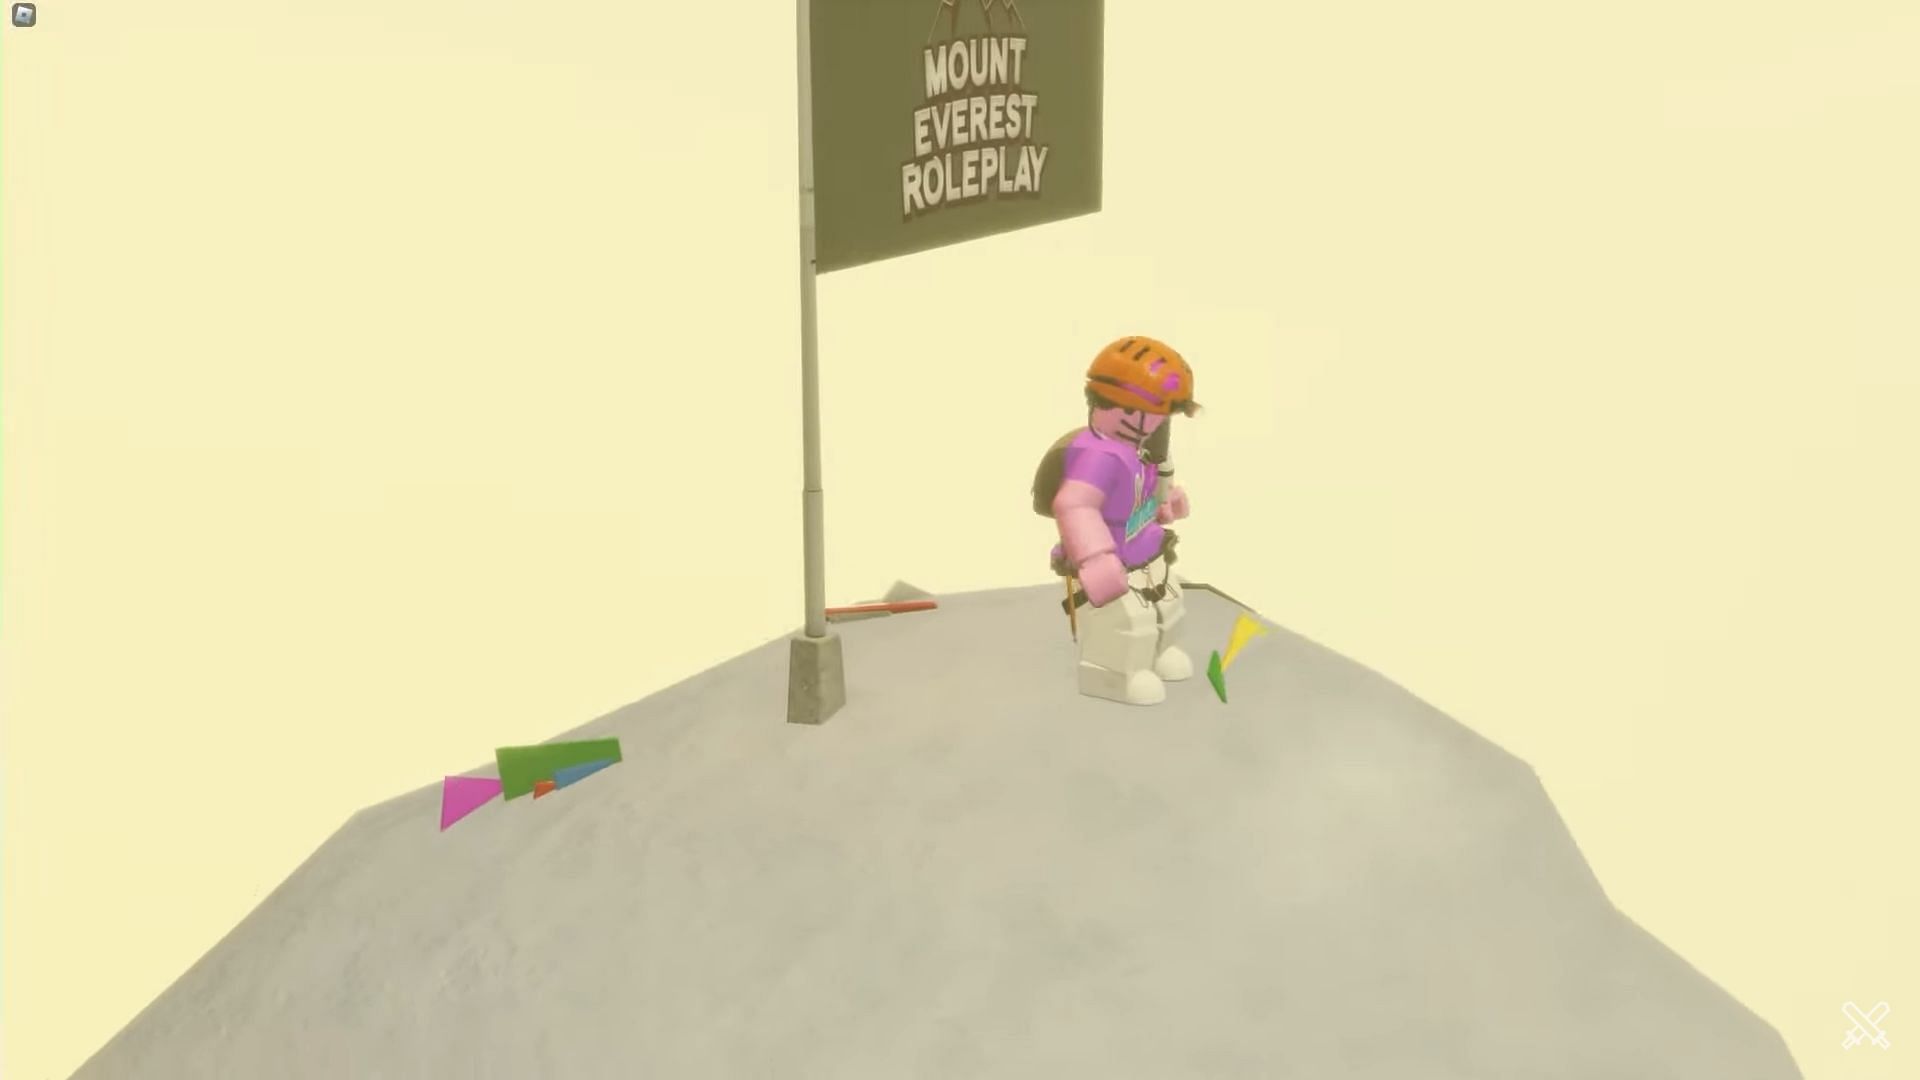 The winning moment of PinkLeaf (Image via Roblox Battles/YouTube)